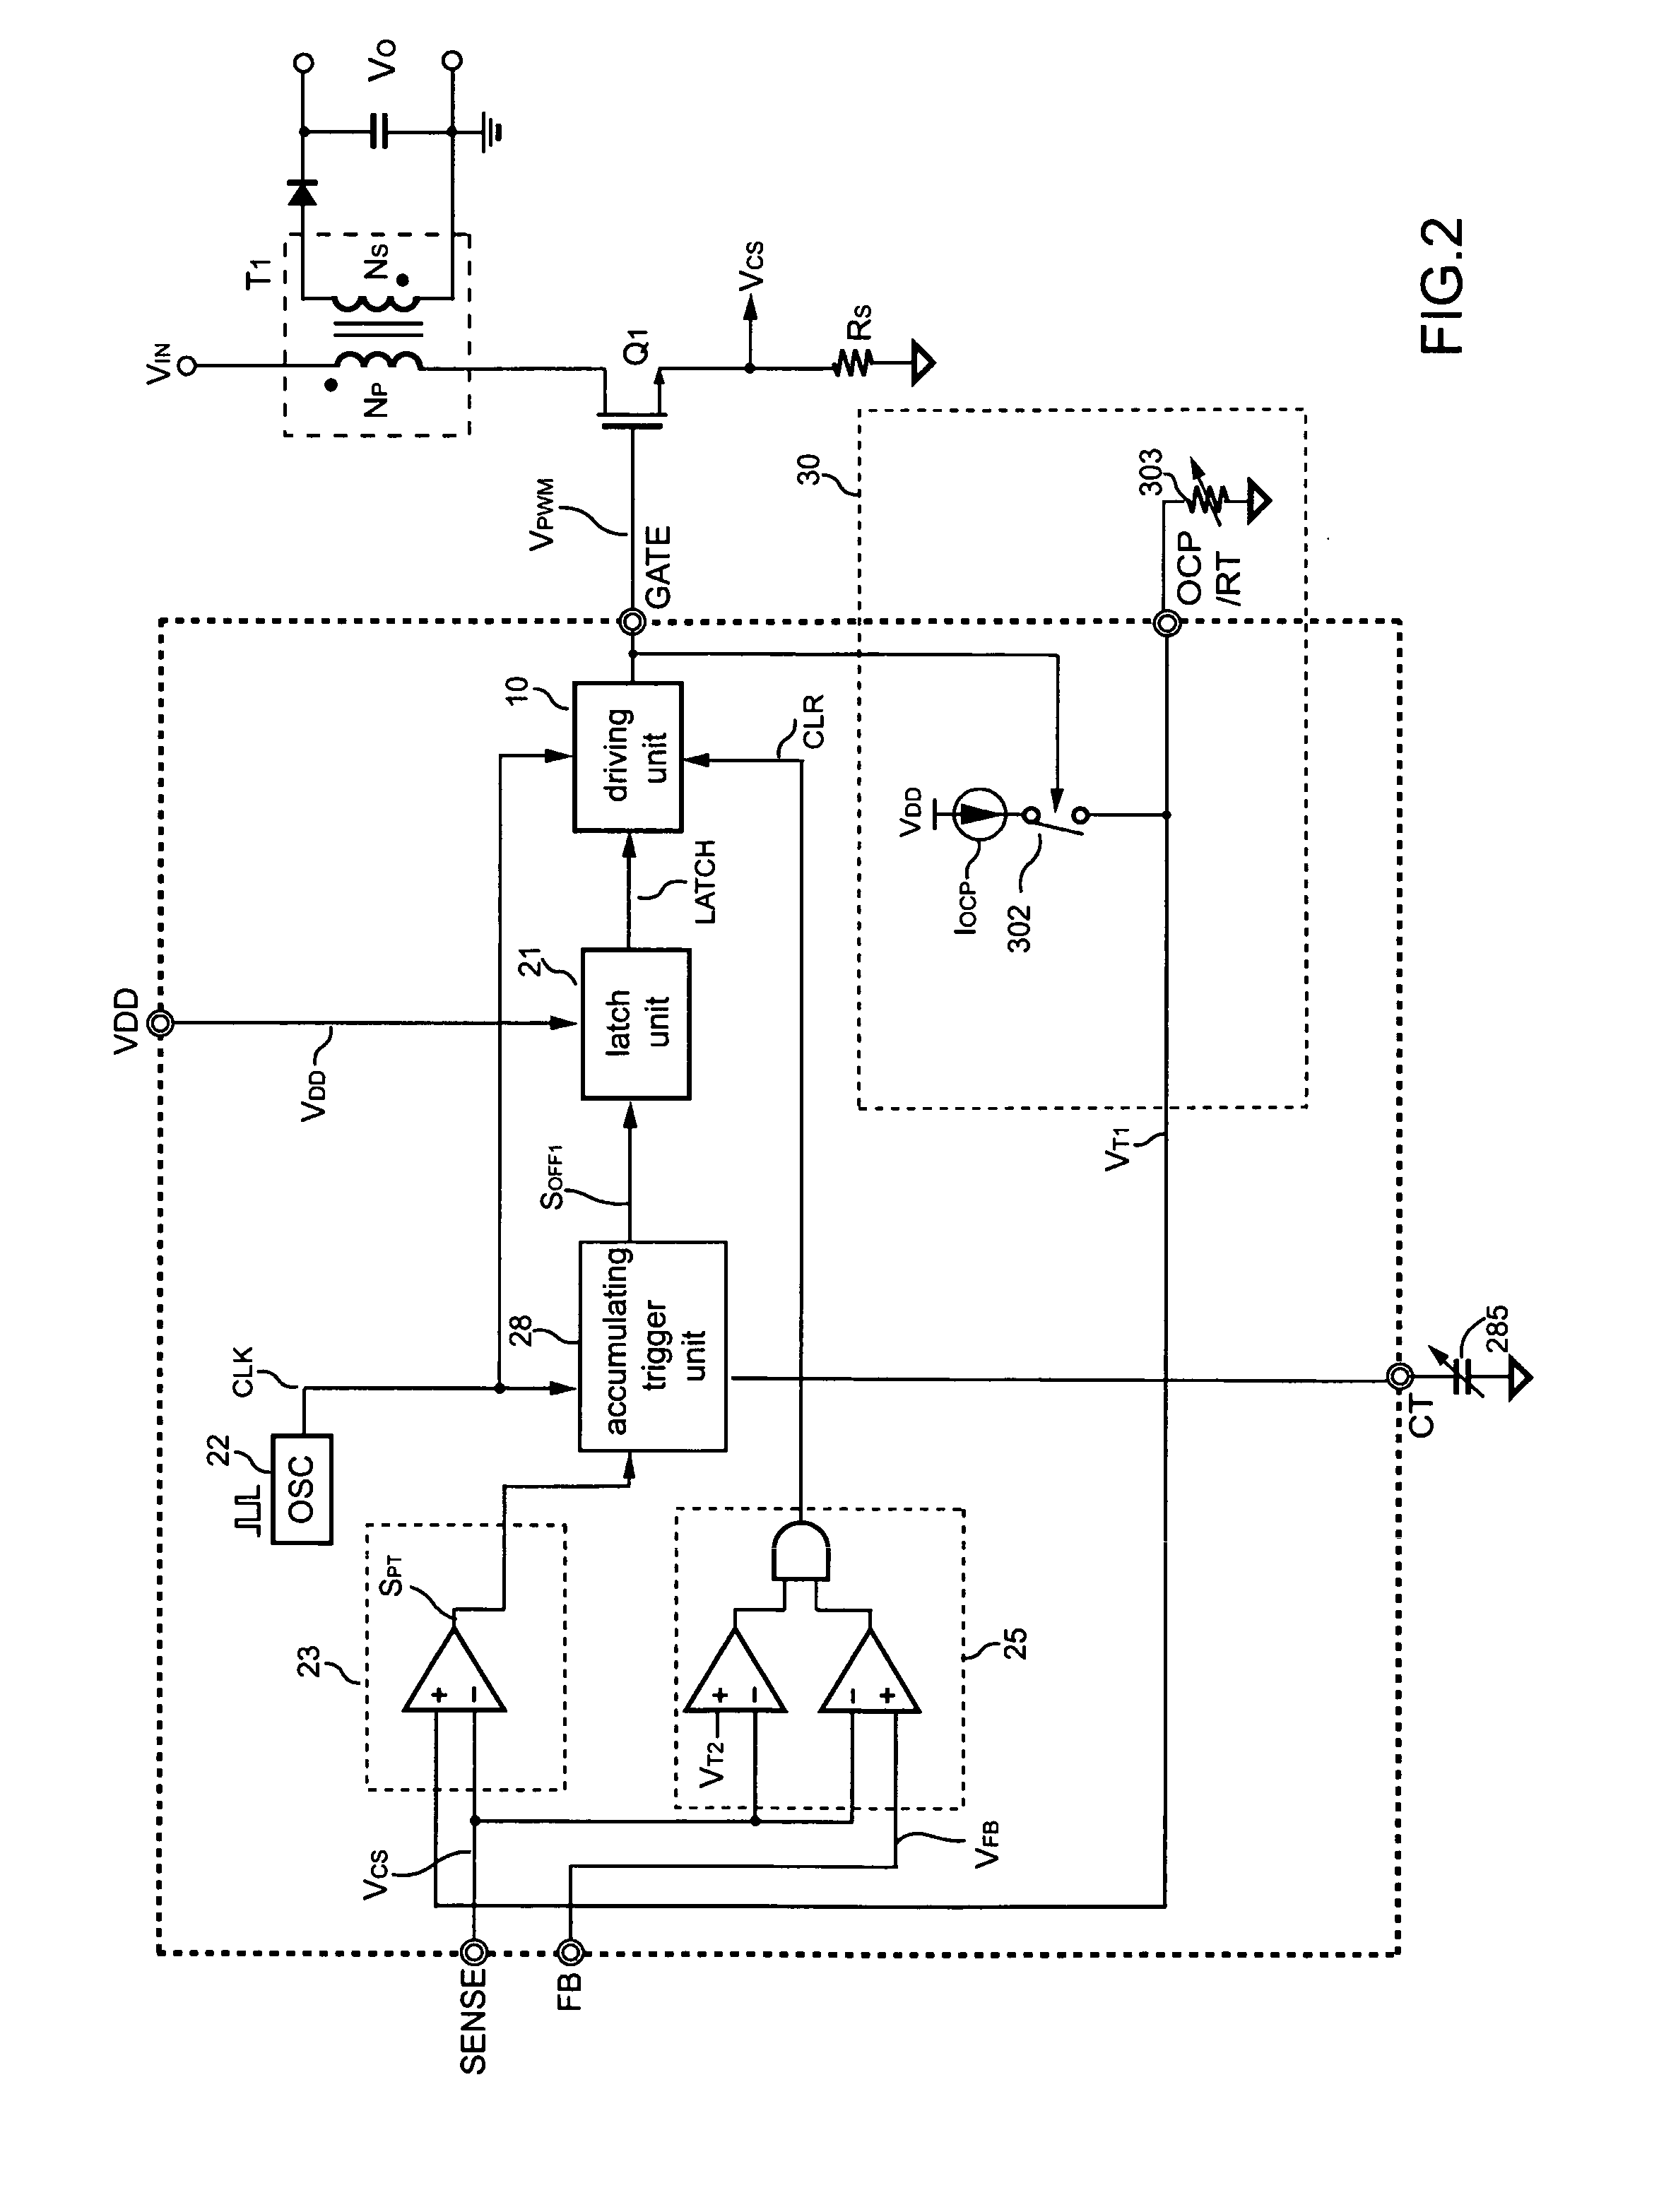 Over-power protection apparatus with programmable over-current threshold